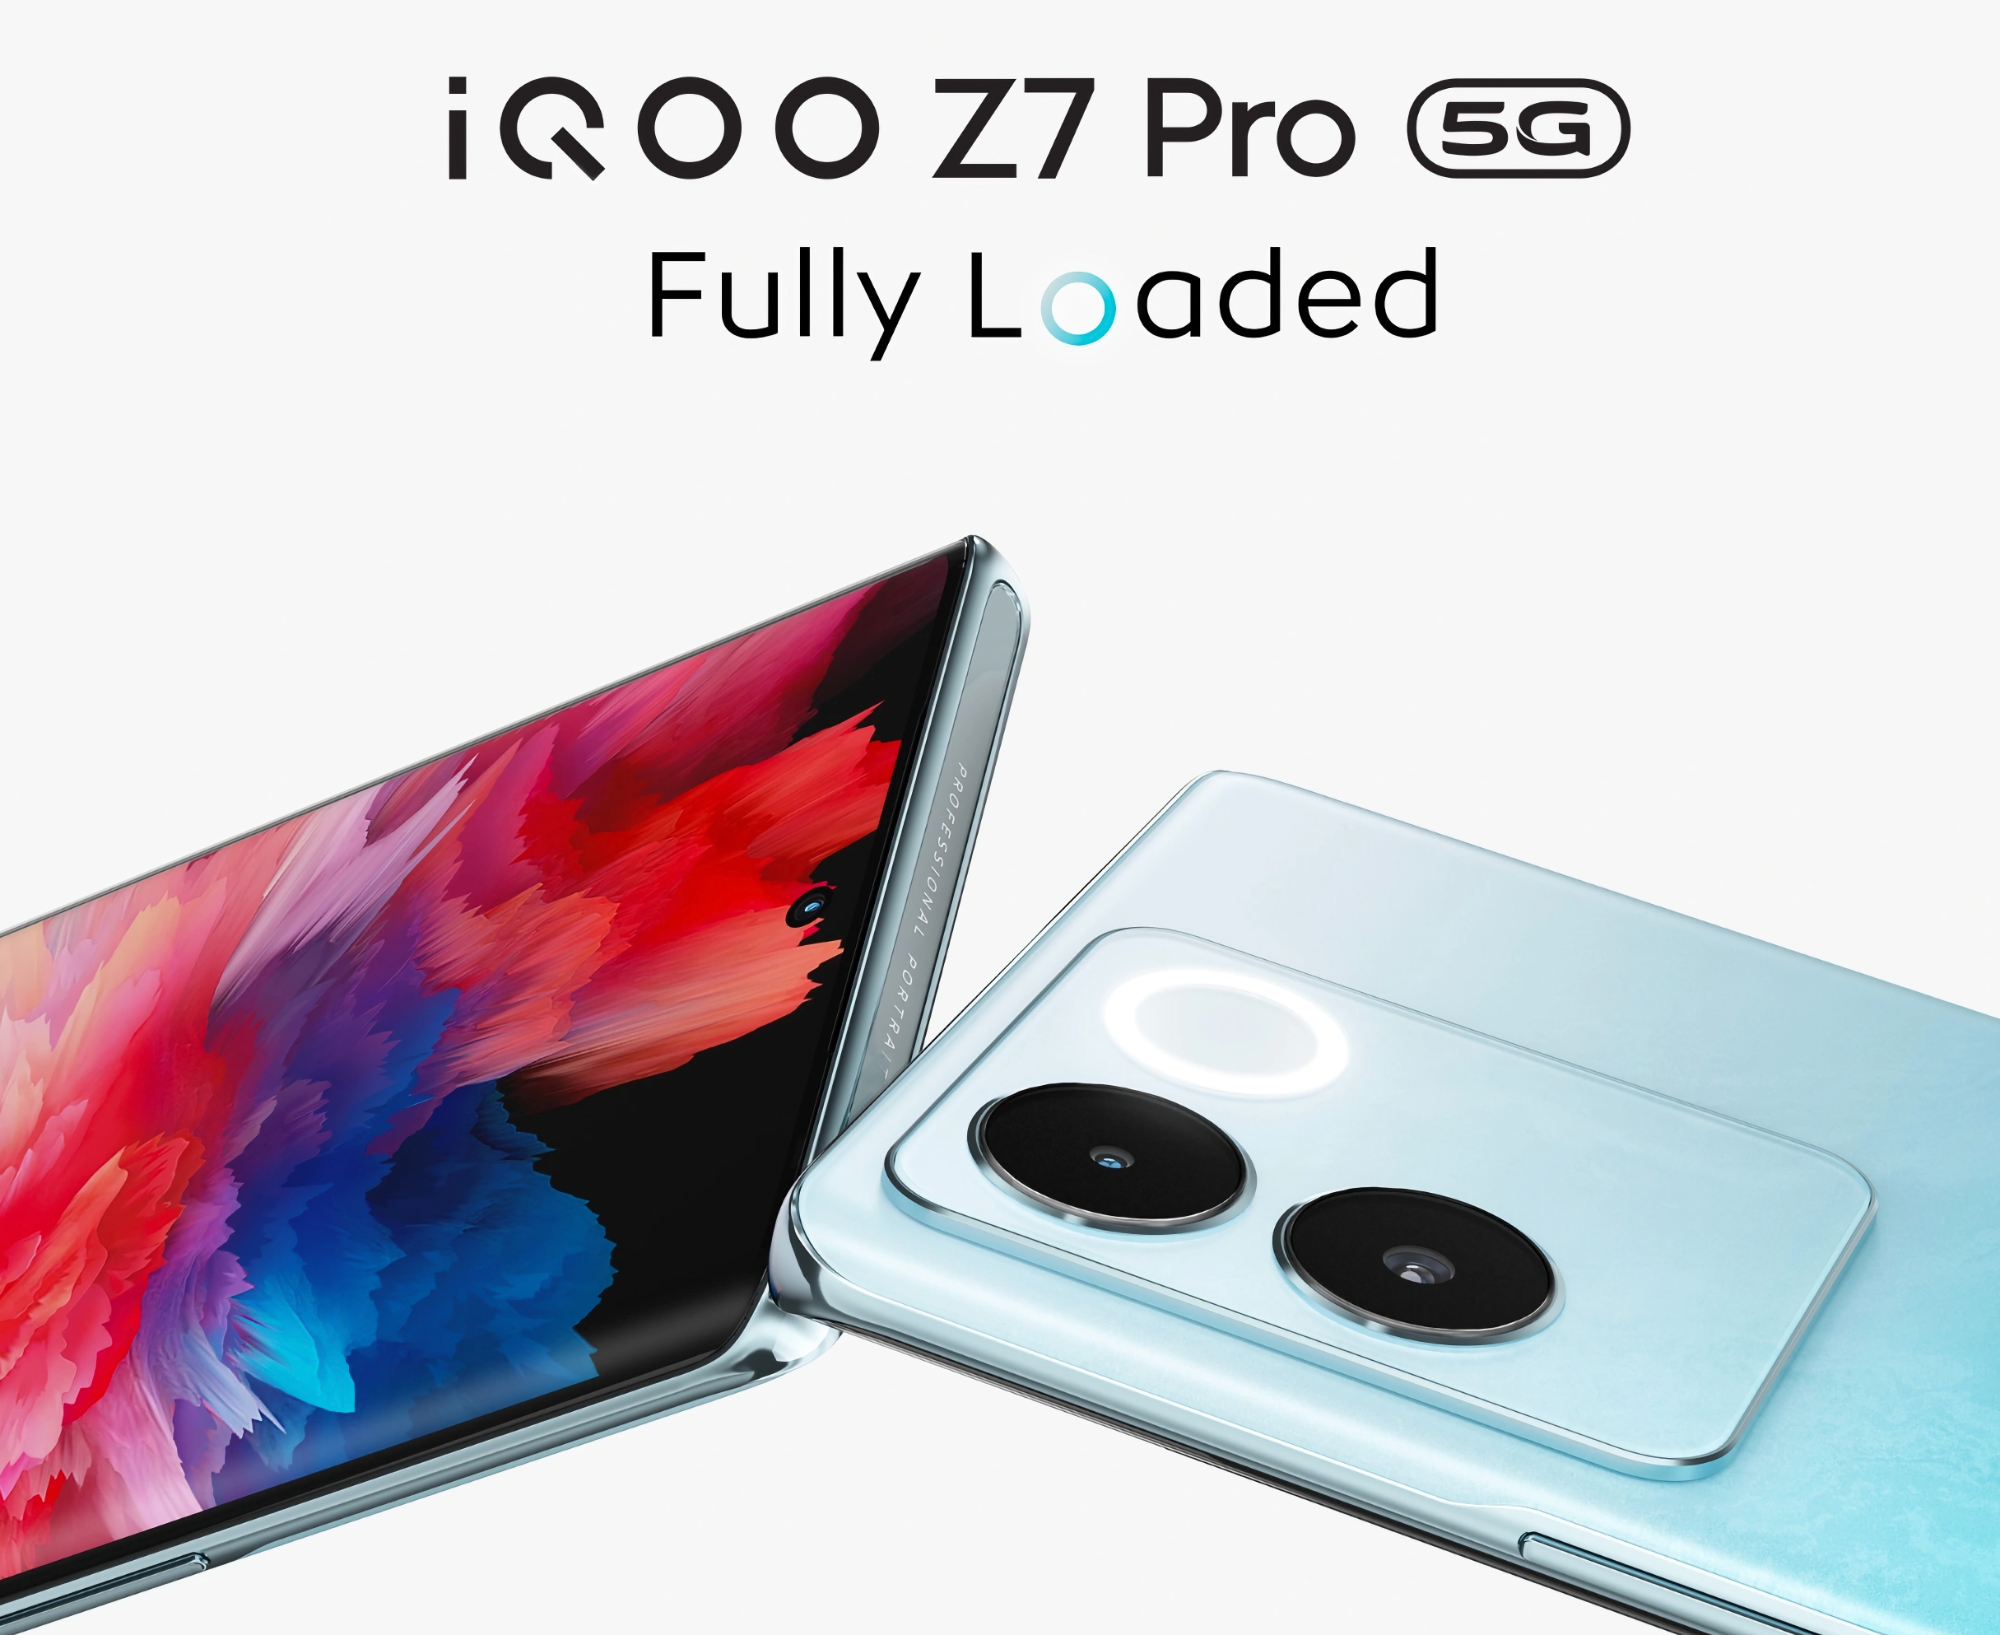 iQOO Z7 Pro: 120Hz AMOLED display, MediaTek Dimensity 7200 chip, 64 MP camera with OIS and 4600 mAh battery for $290